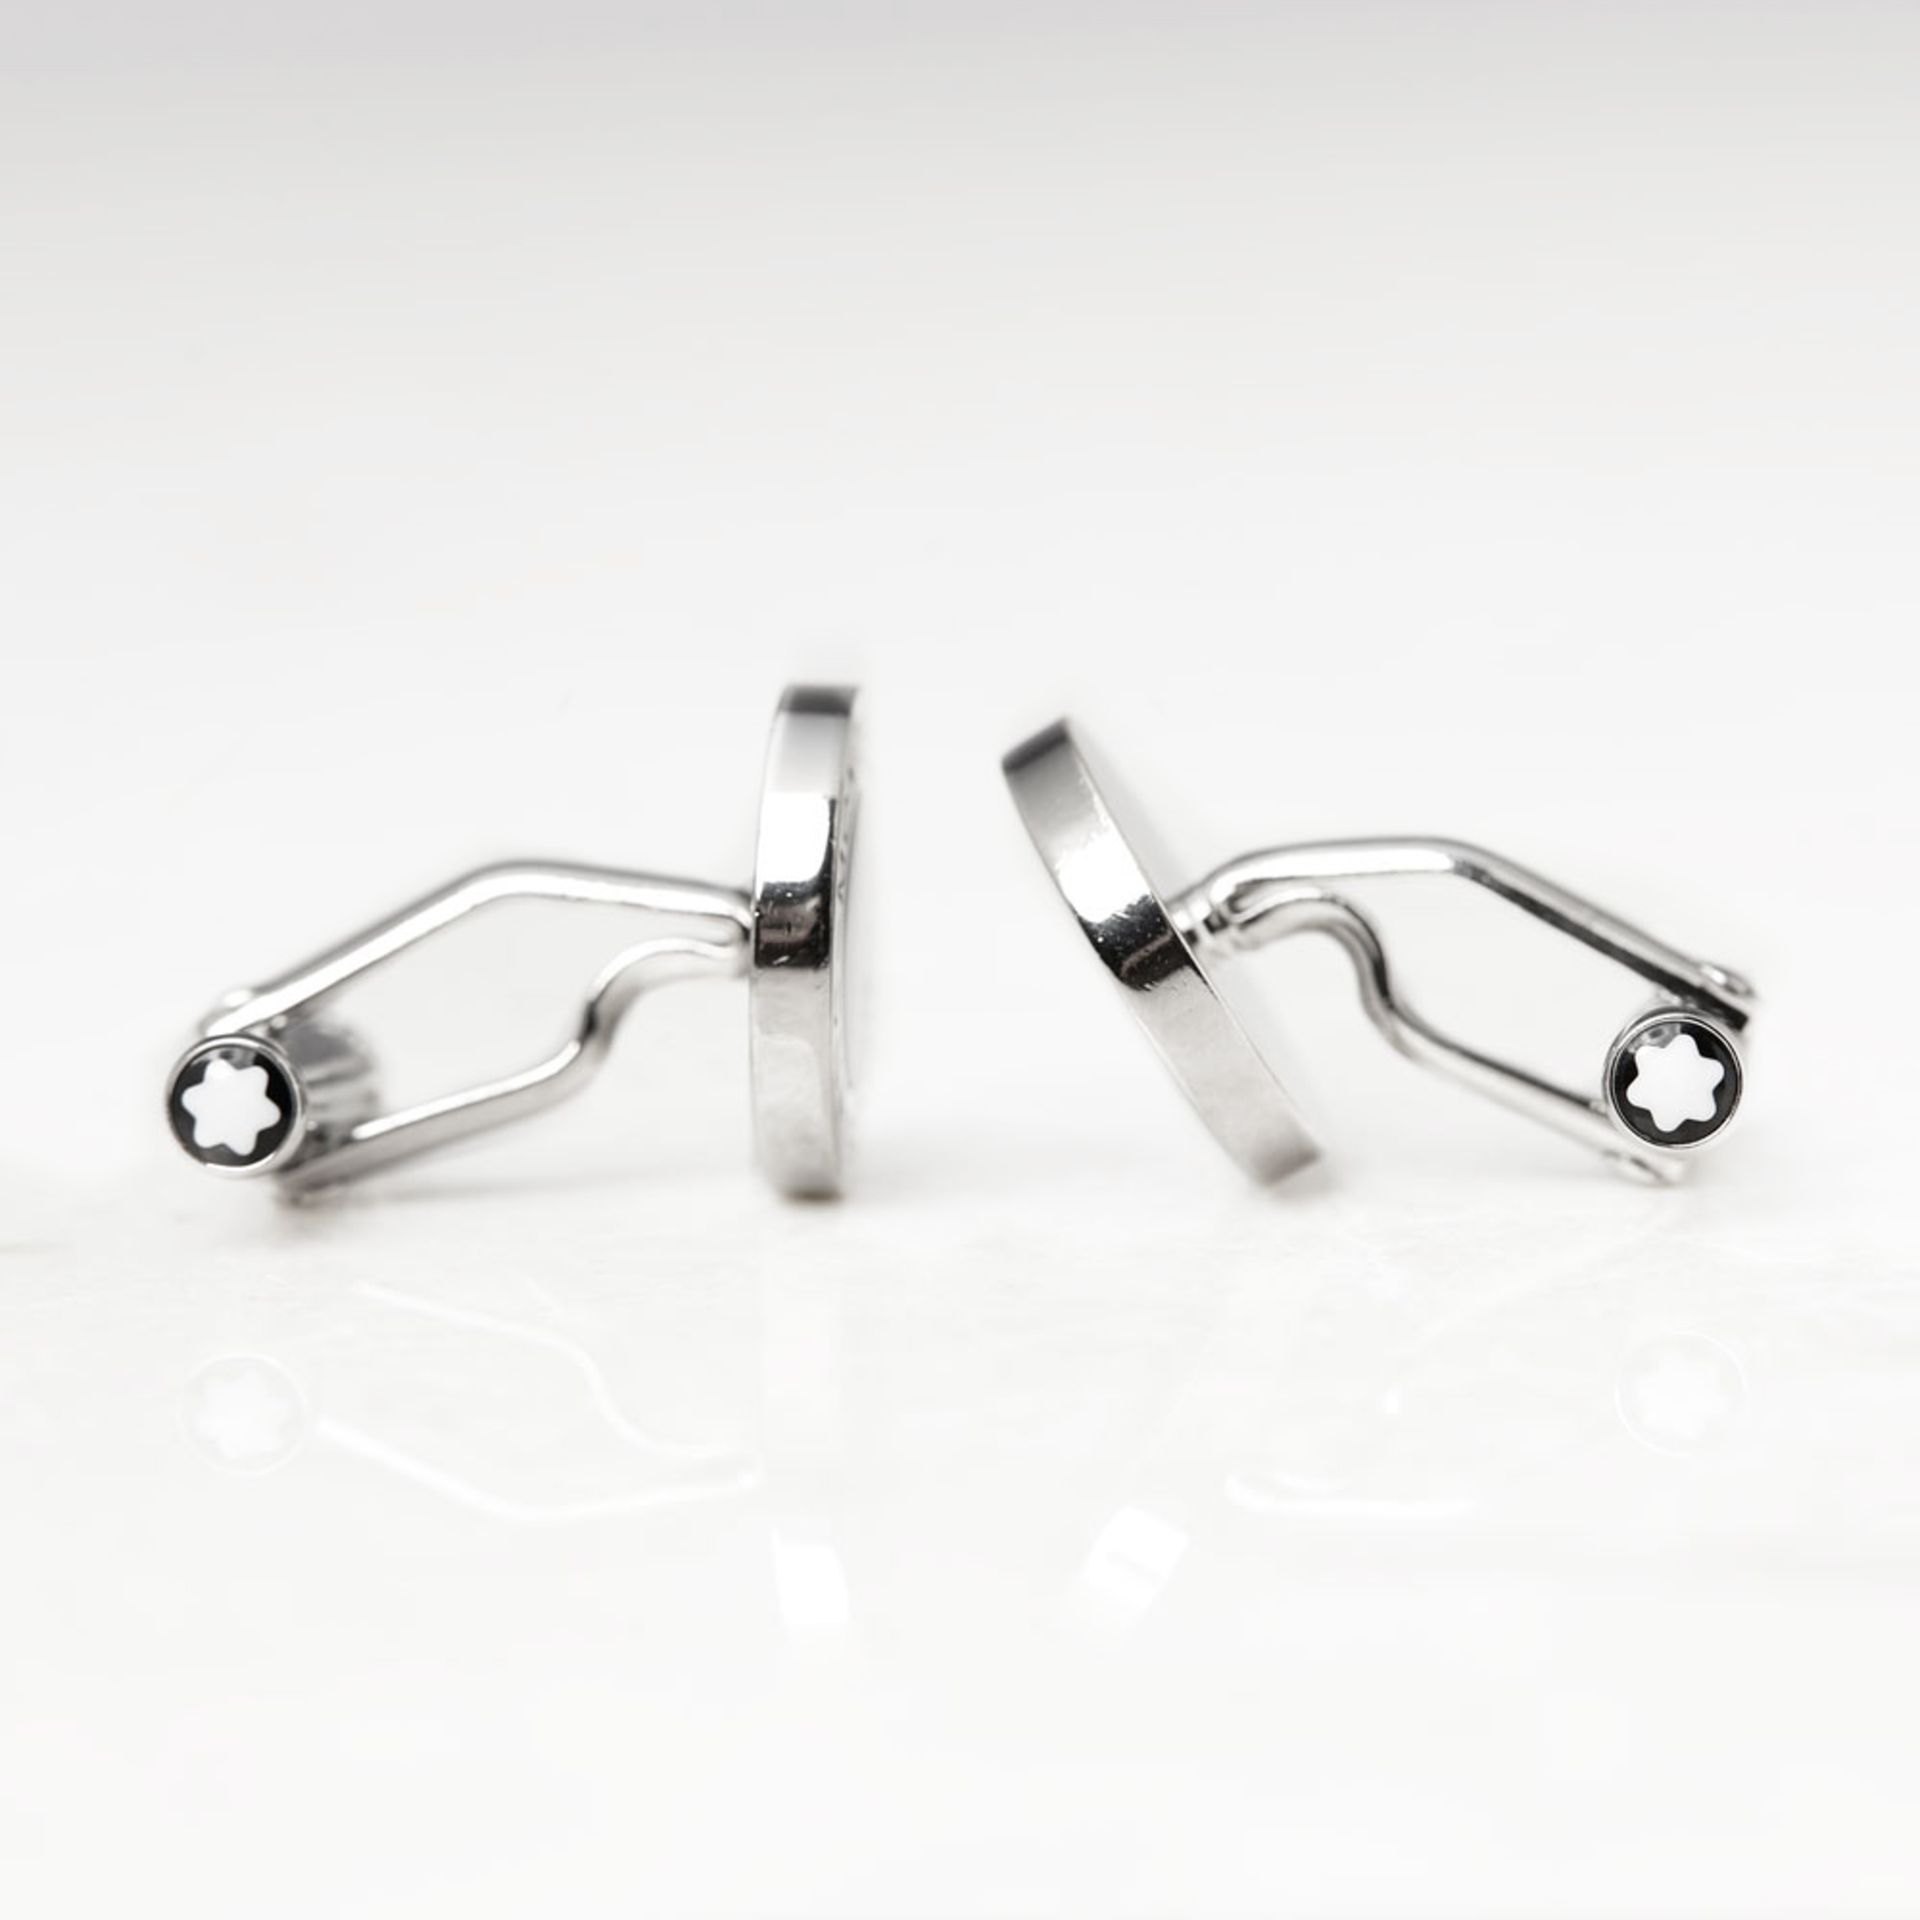 Montblanc Stainless Steel Black Onyx Iconic Cufflinks - Image 2 of 4